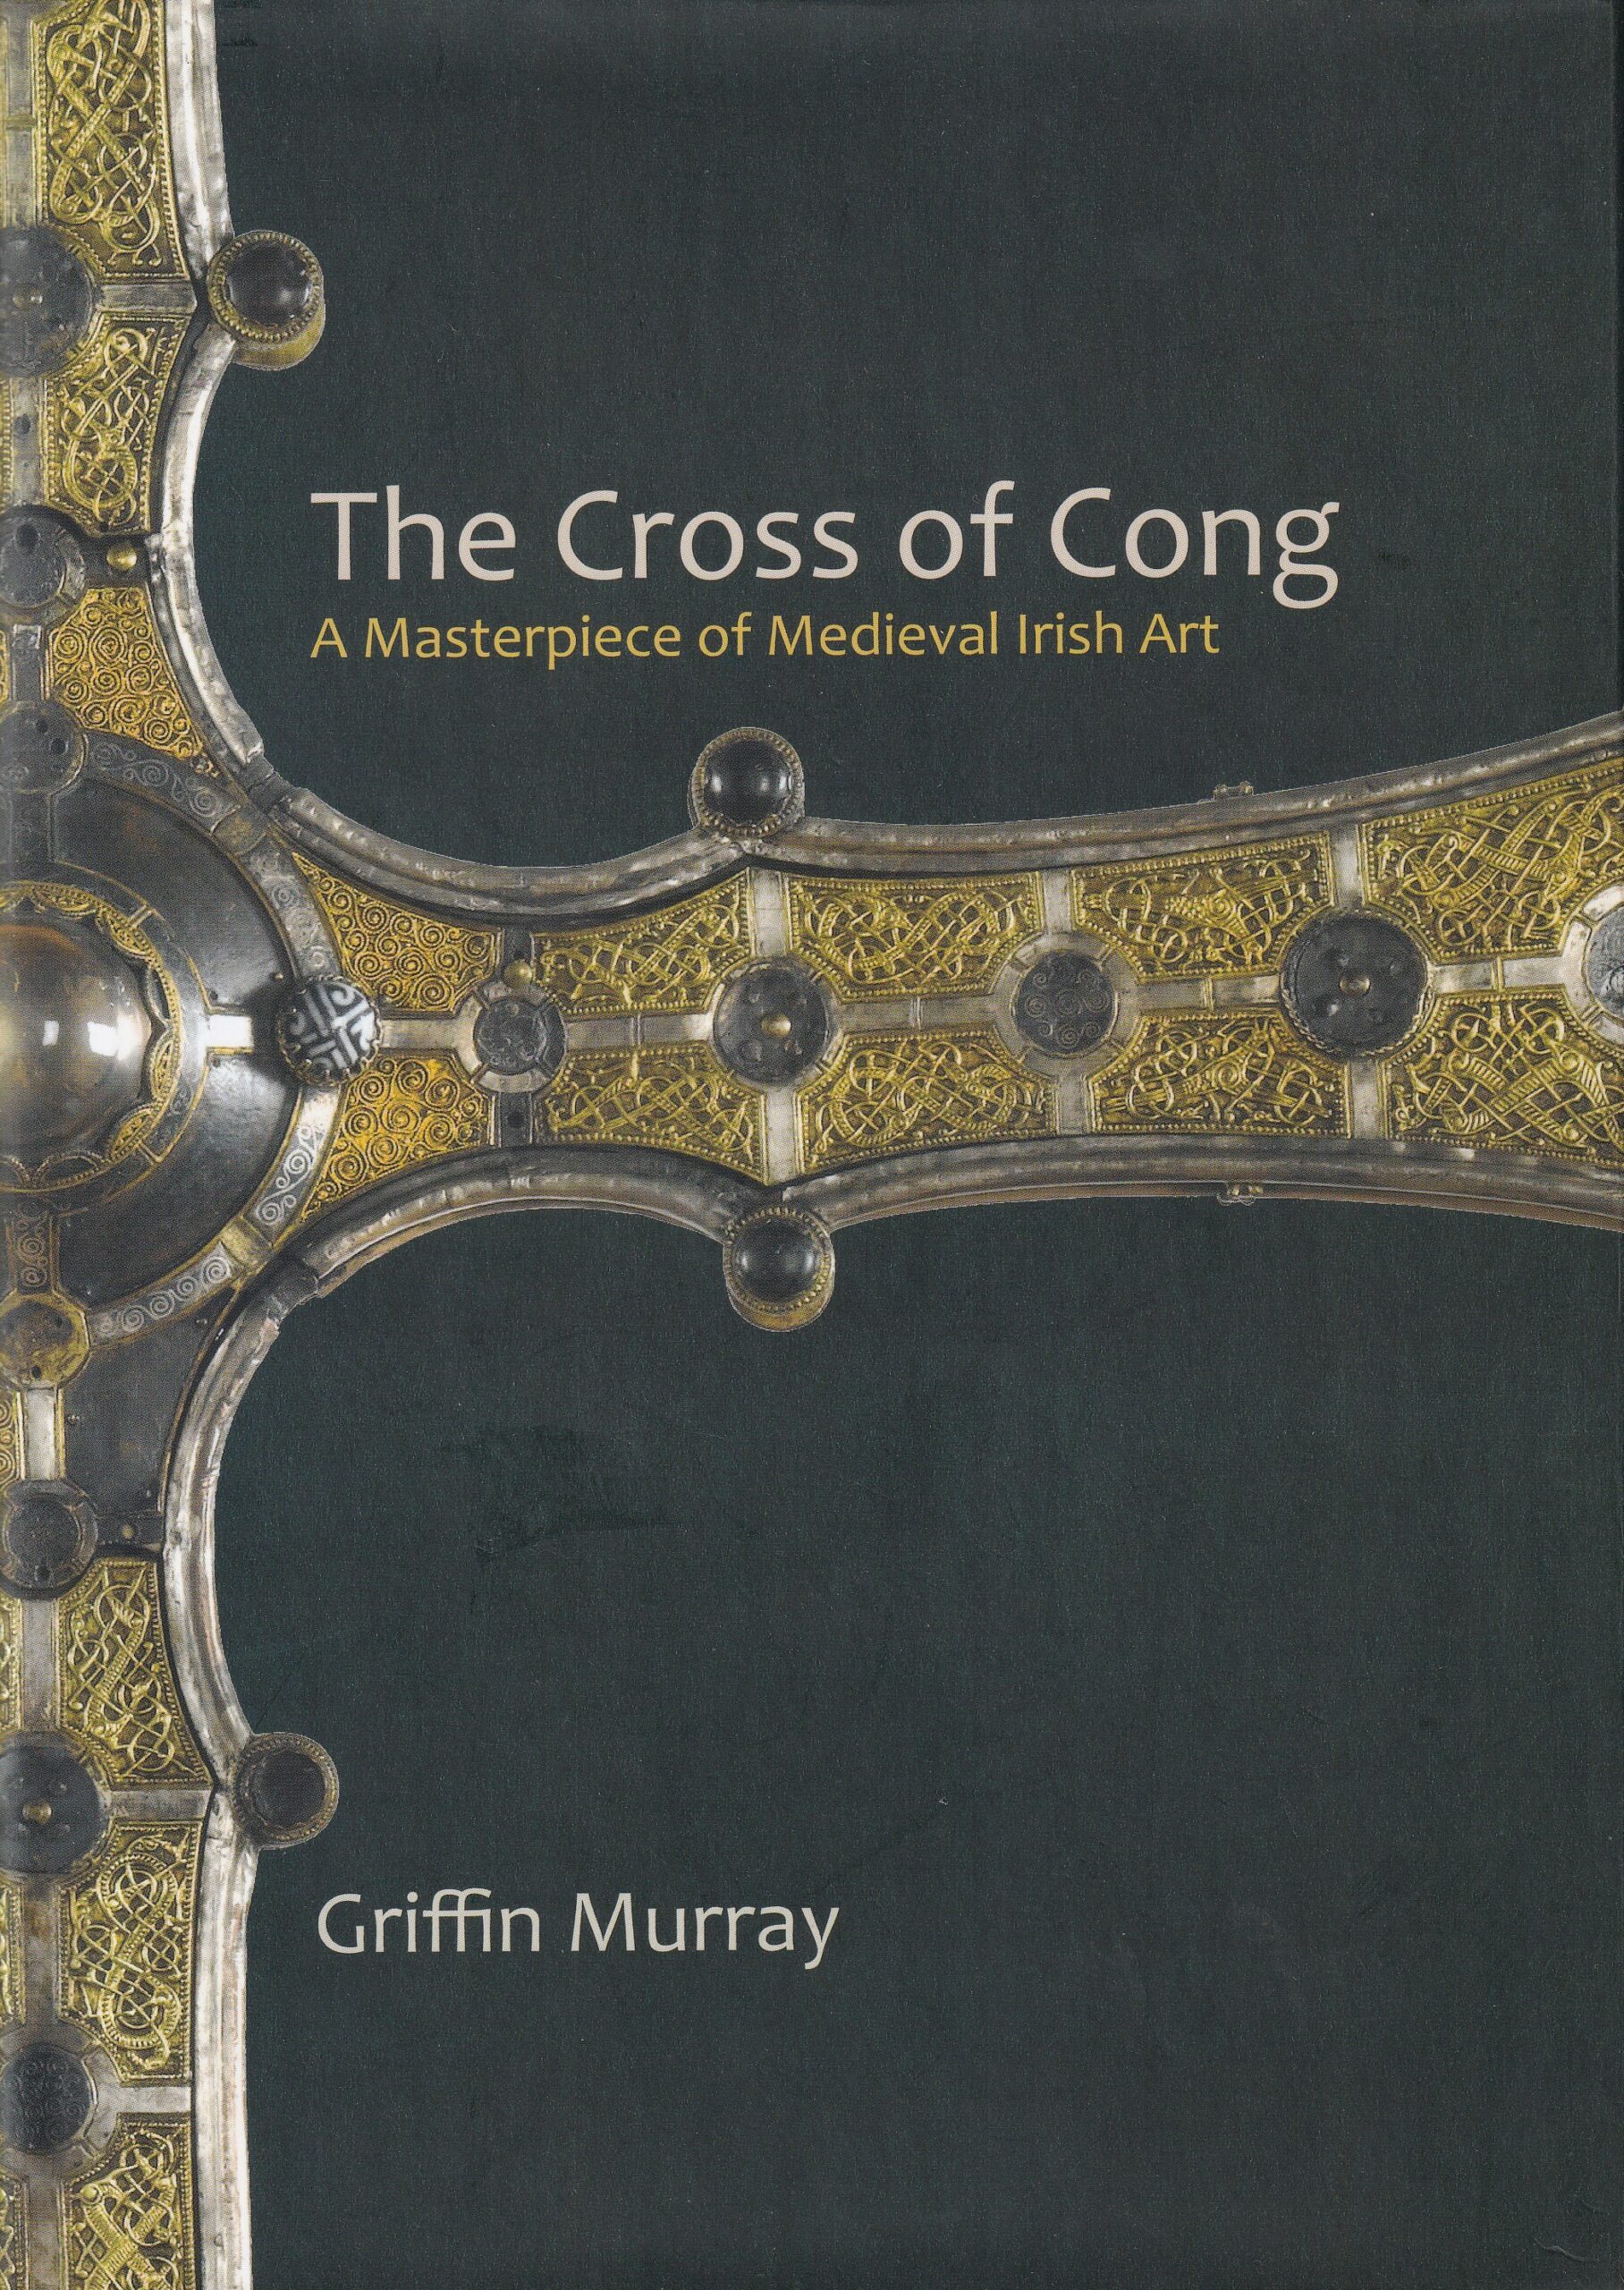 The Cross of Cong: A Masterpiece of Medieval Irish Art | Griffin Murray | Charlie Byrne's